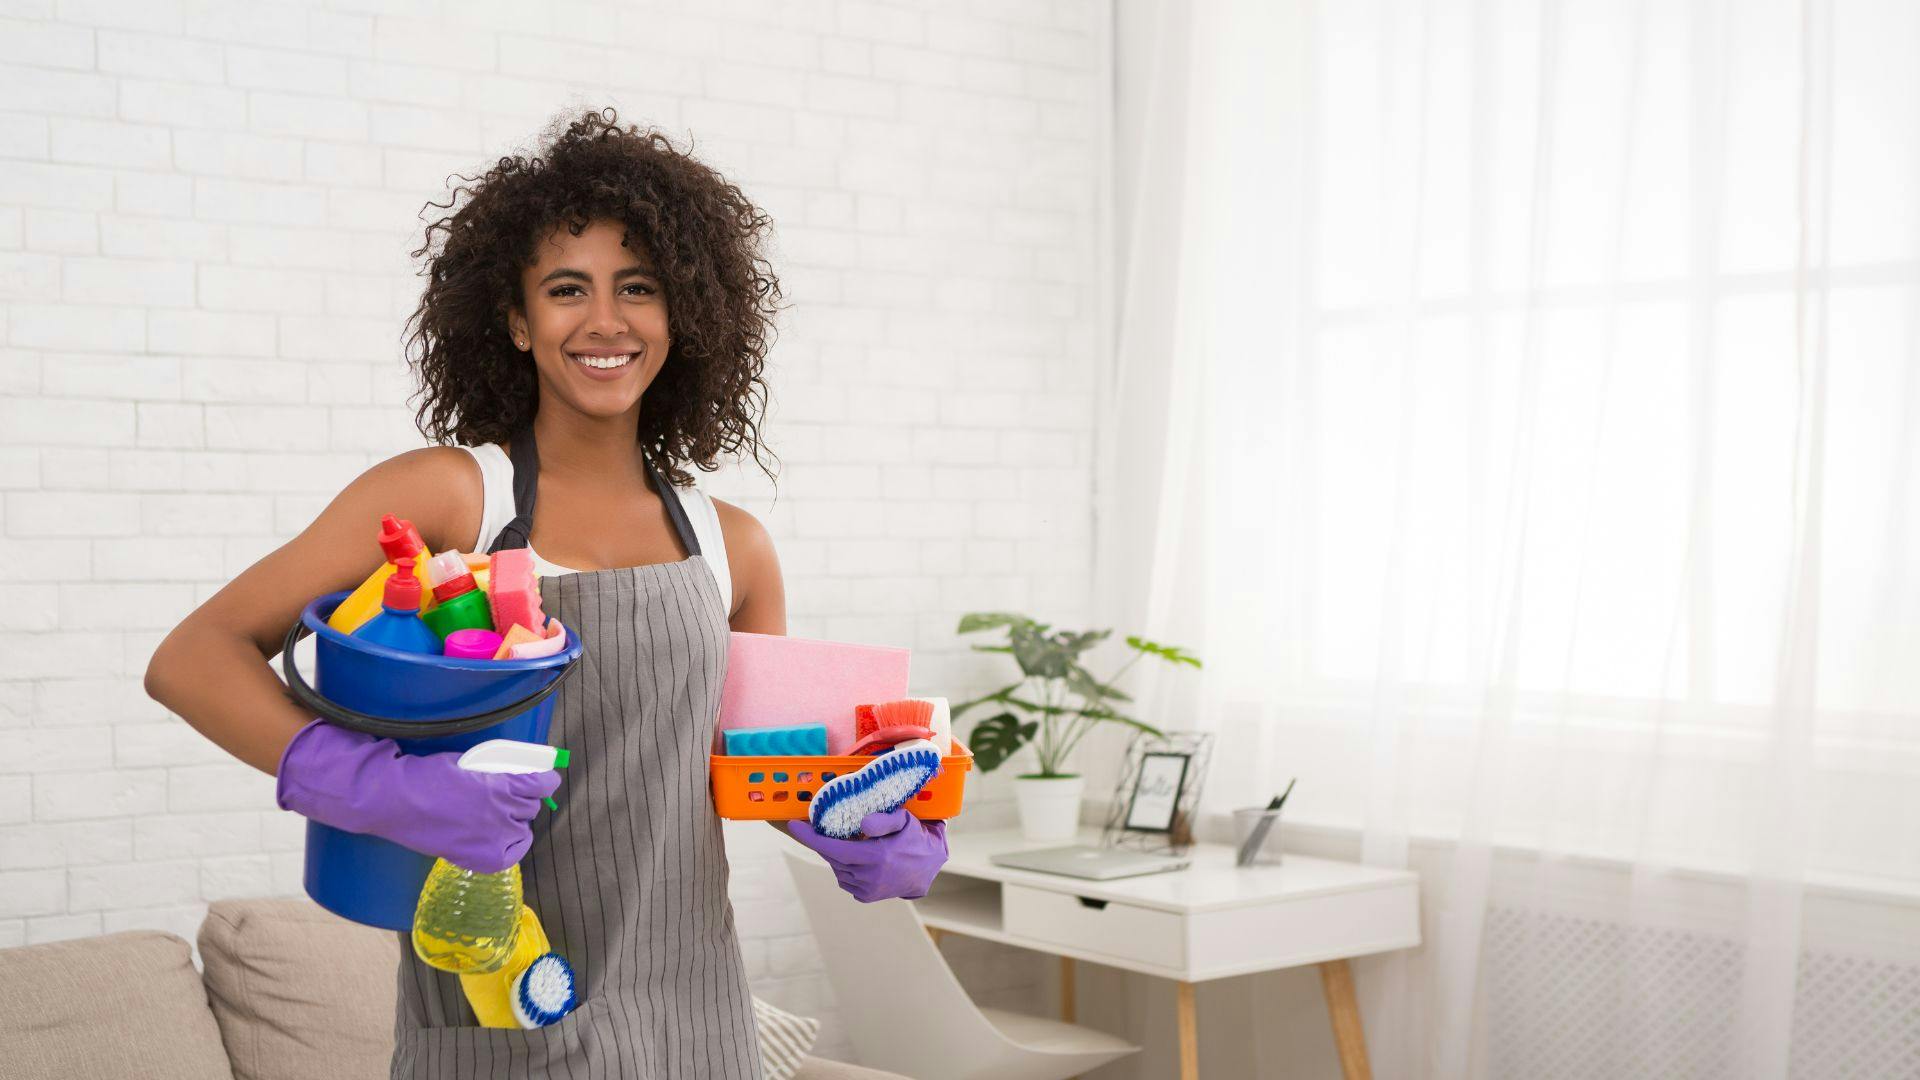 Field service cleaner holding cleaning supplies in her hands as she smiles